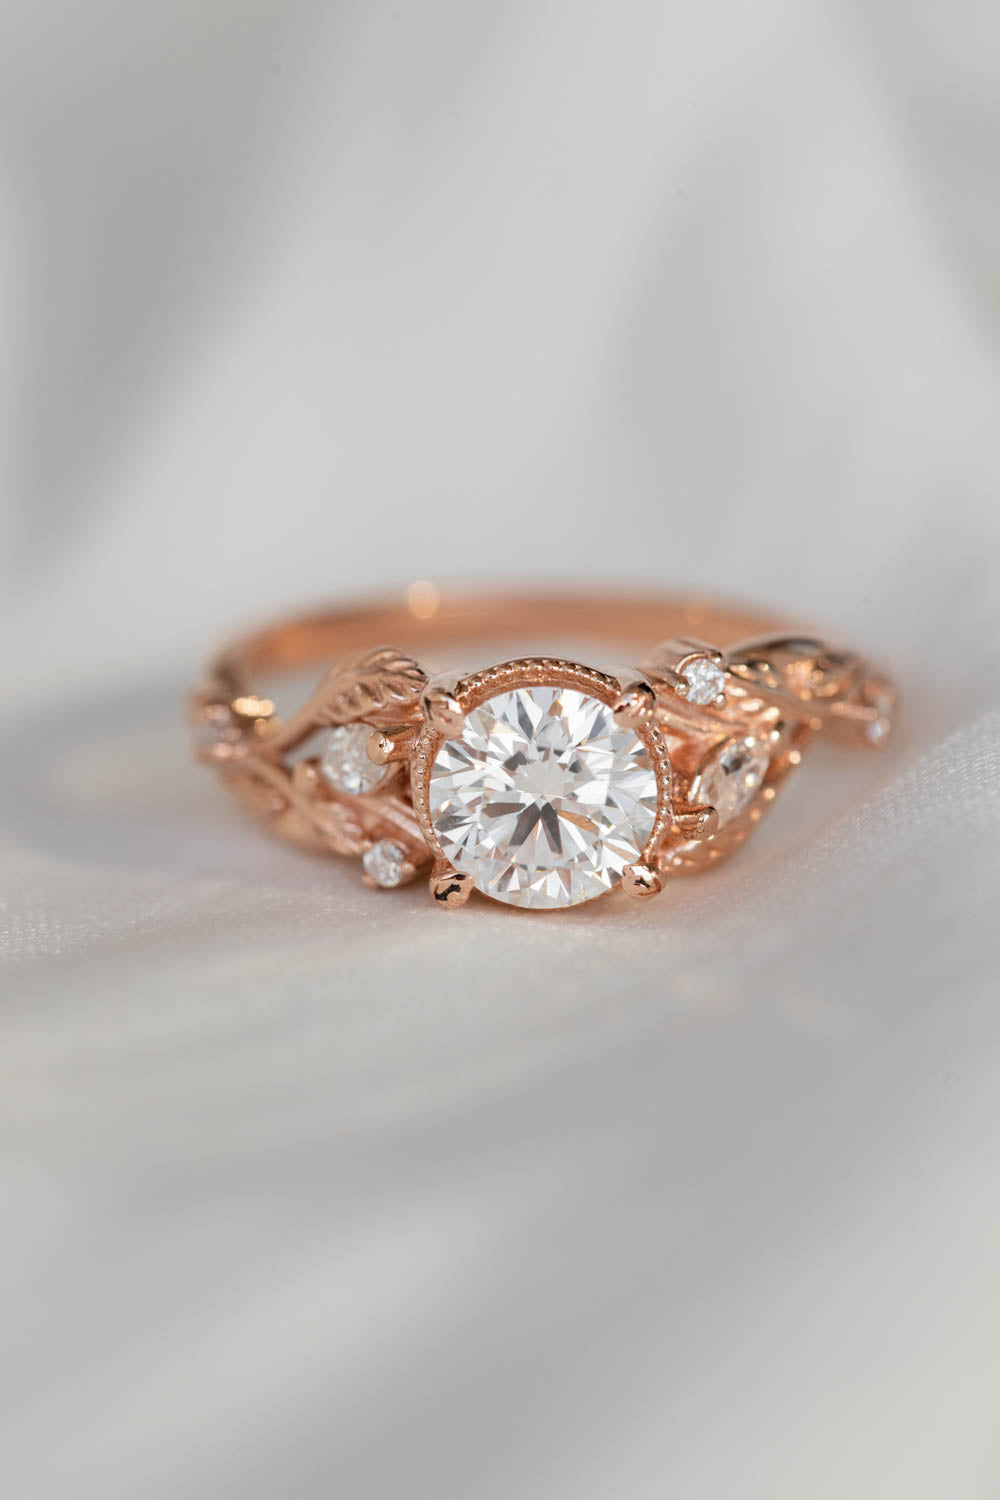 1 carat moissanite engagement ring, rose gold ring with leaves and diamonds / Patricia - Eden Garden Jewelry™